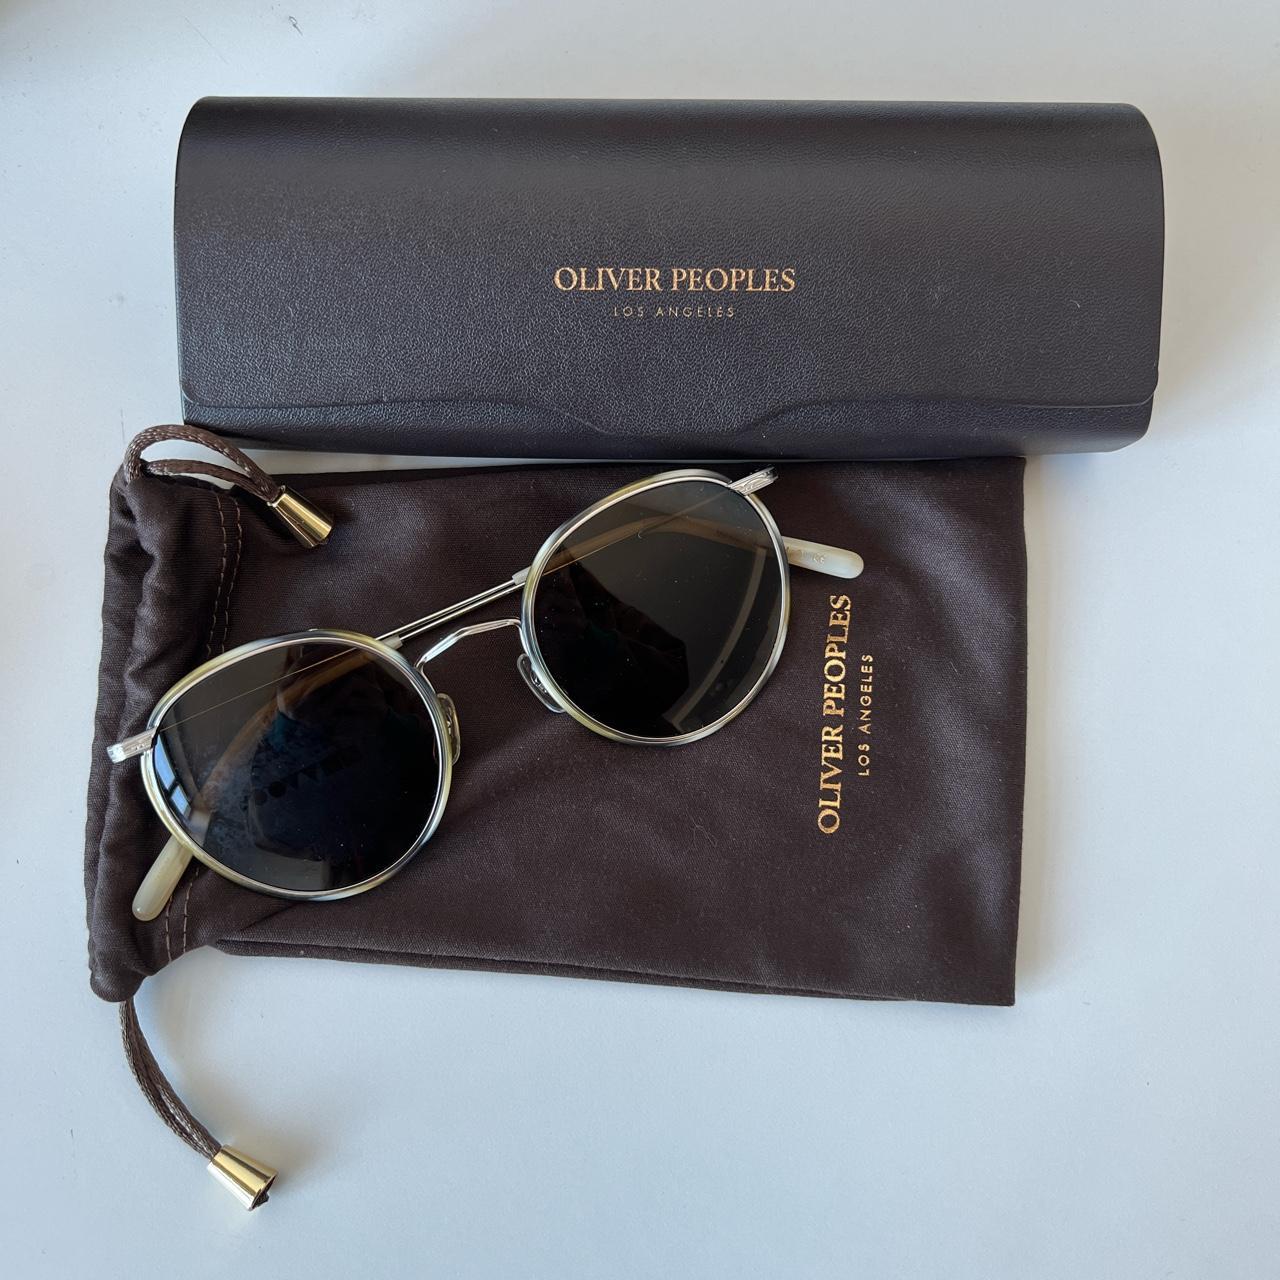 Oliver Peoples Women's Tan and Brown Sunglasses